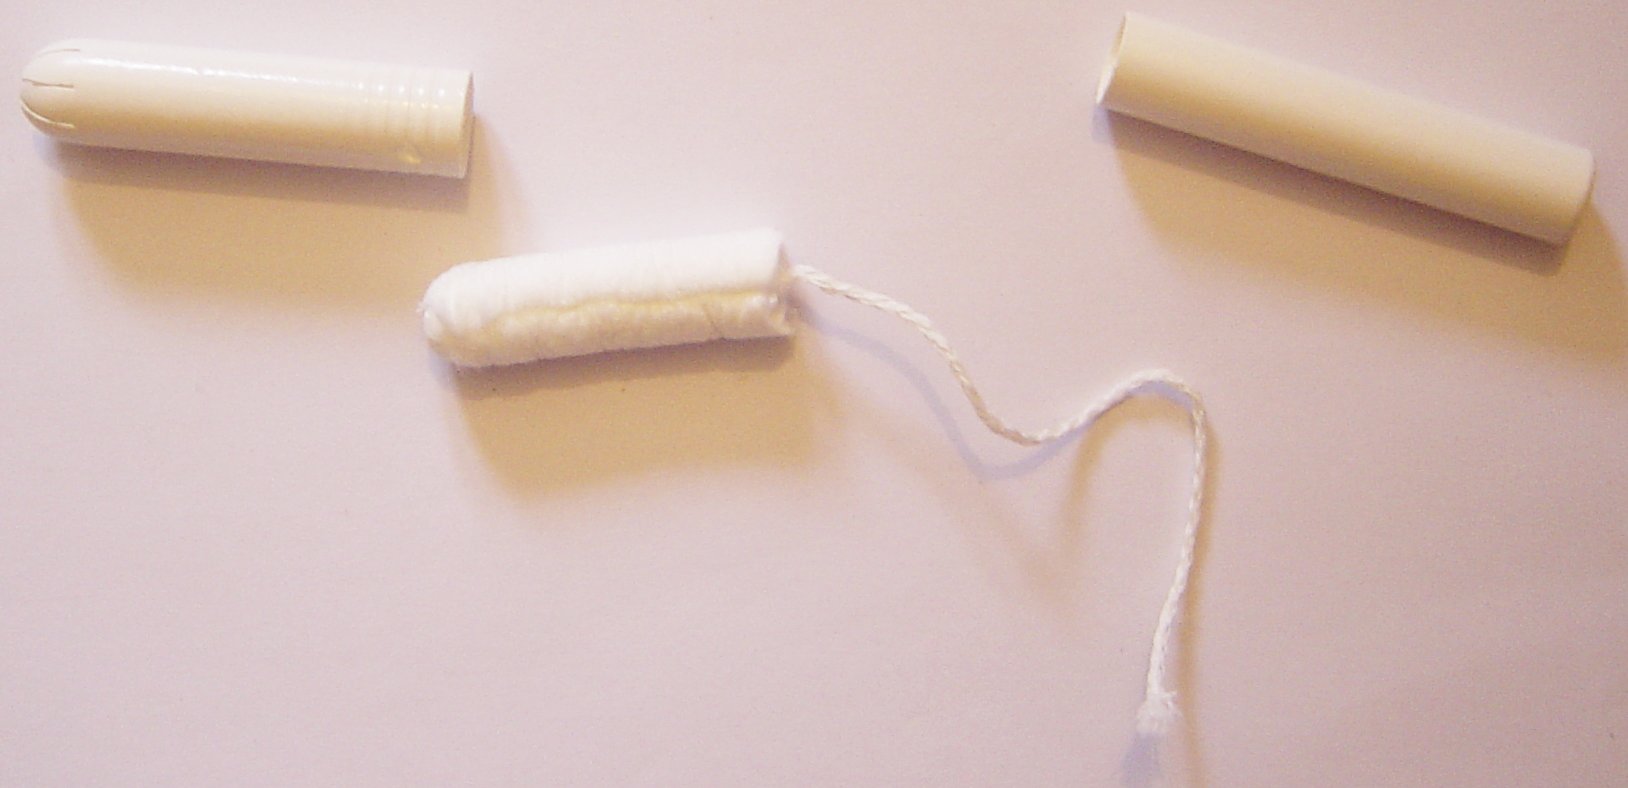 http://upload.wikimedia.org/wikipedia/commons/d/dc/Elements_of_a_tampon_with_applicator.jpg